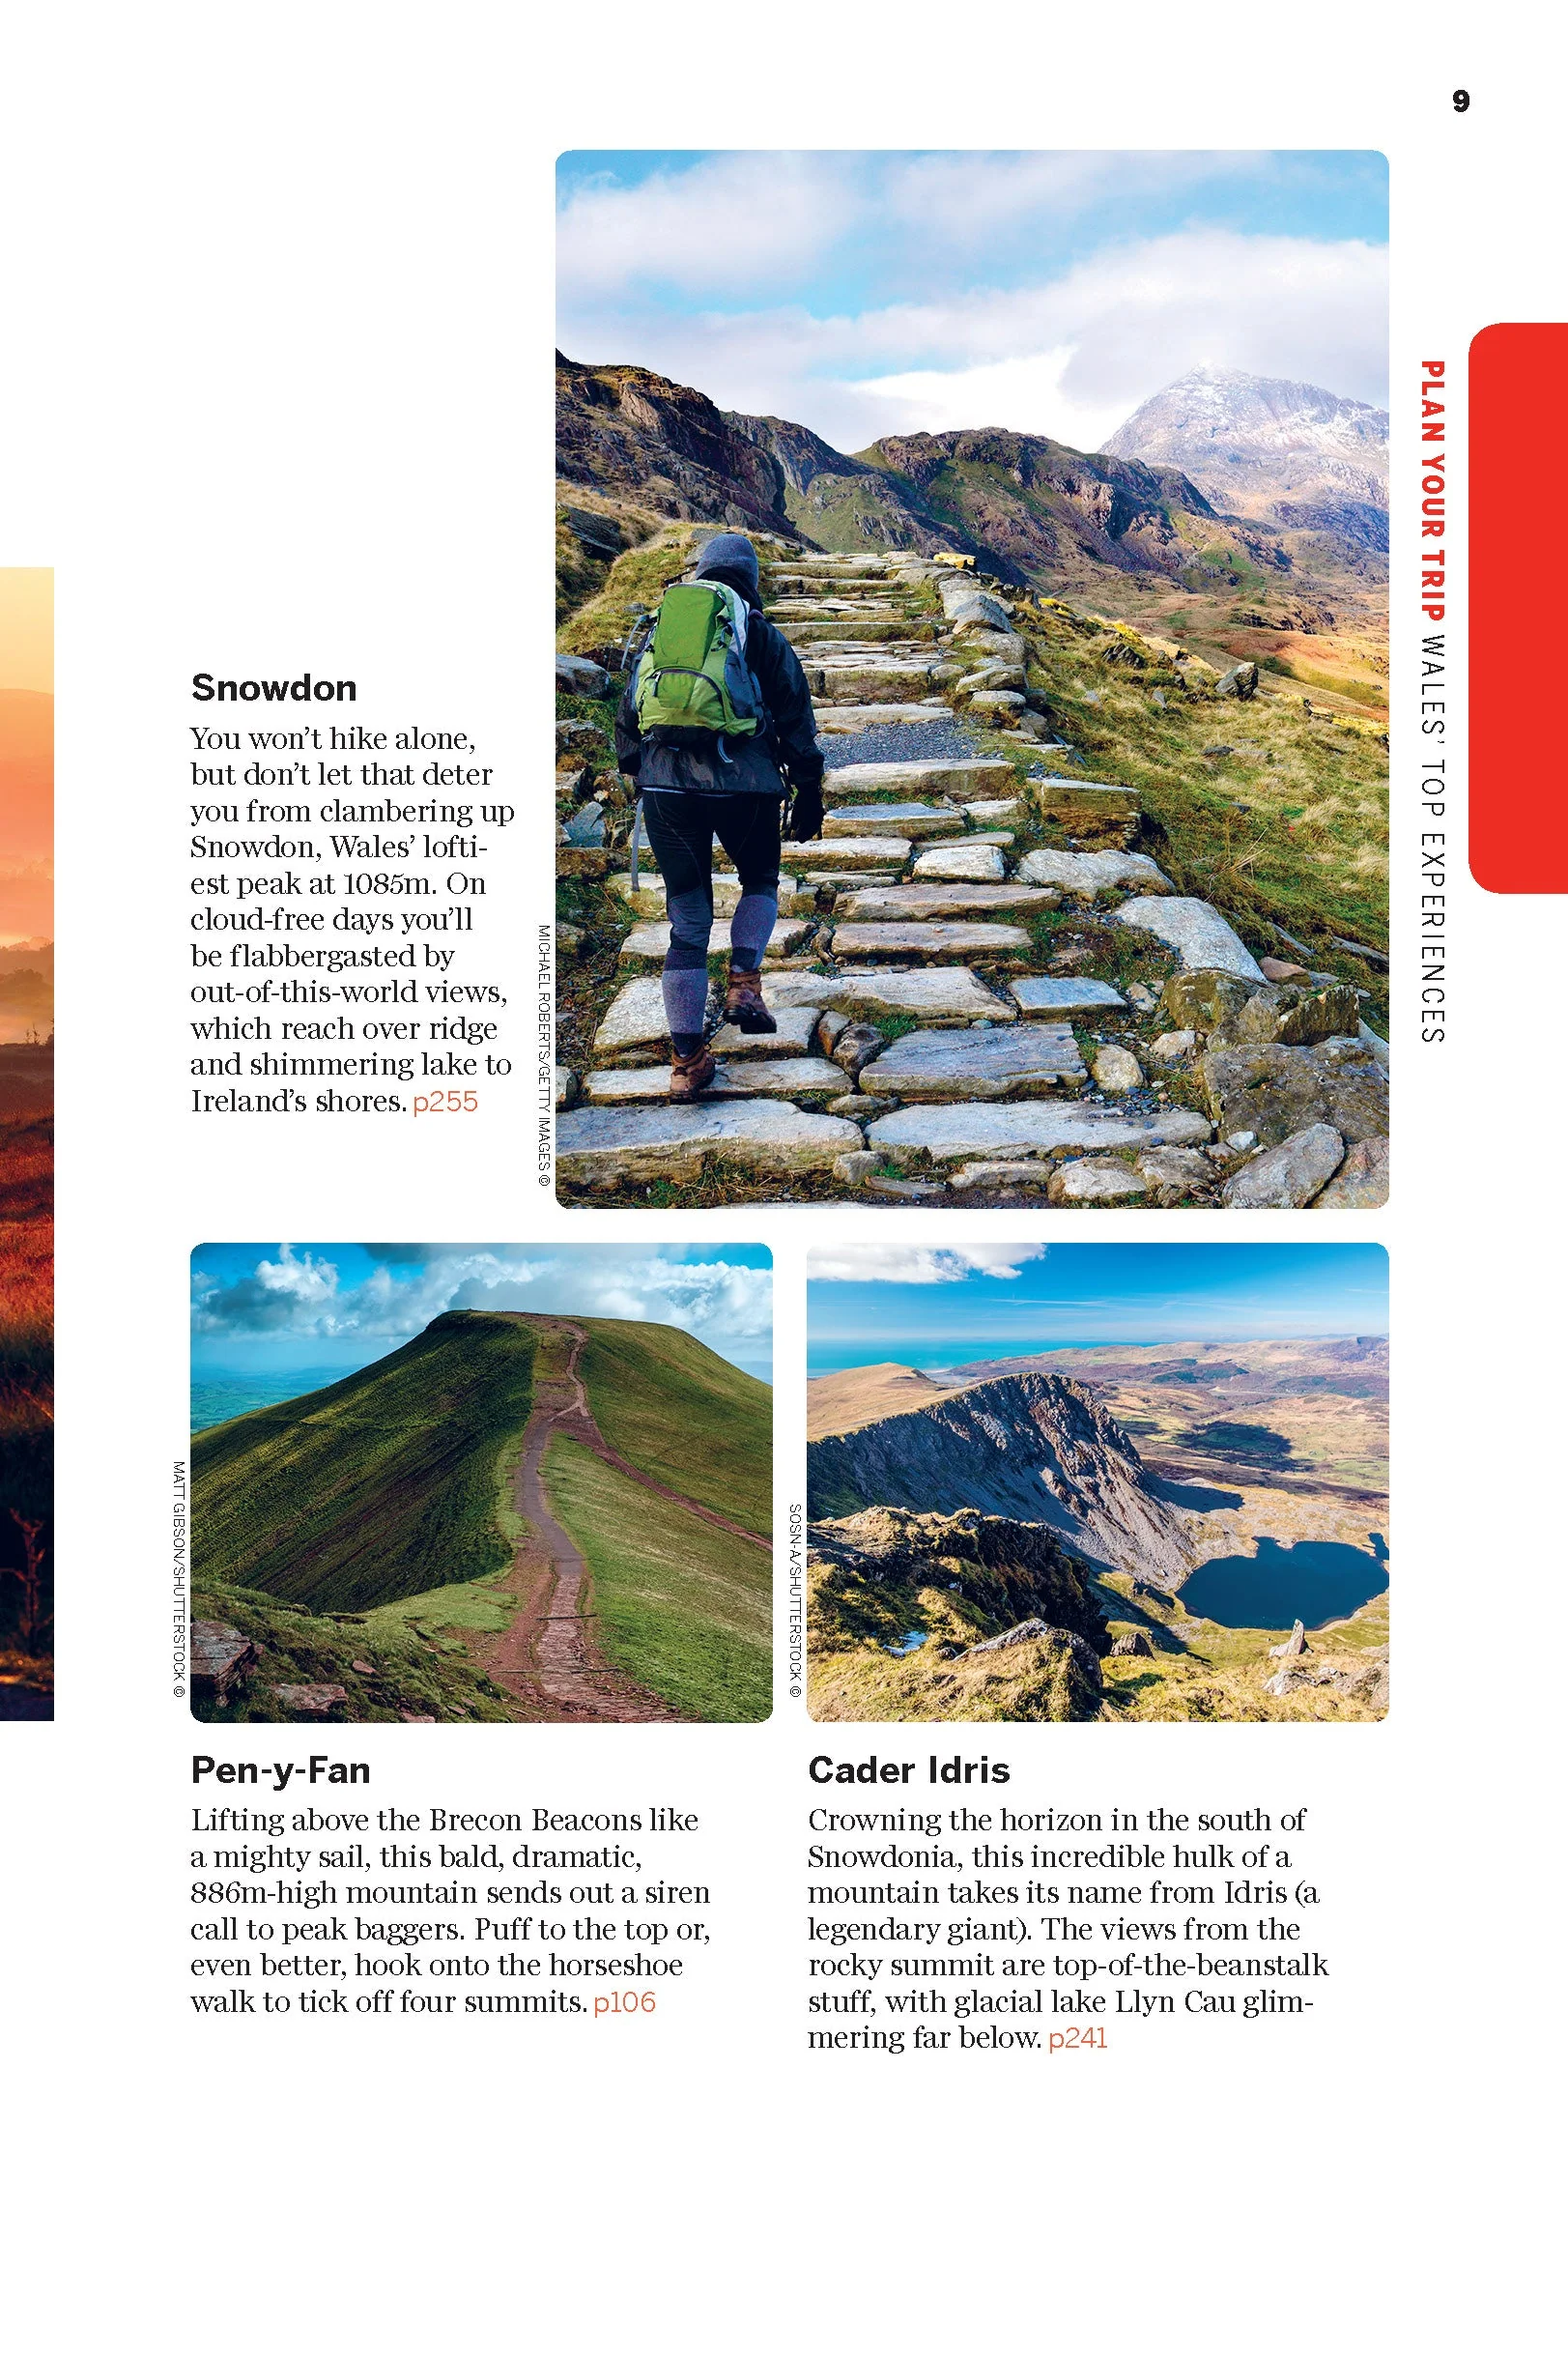 Wales Lonely Planet